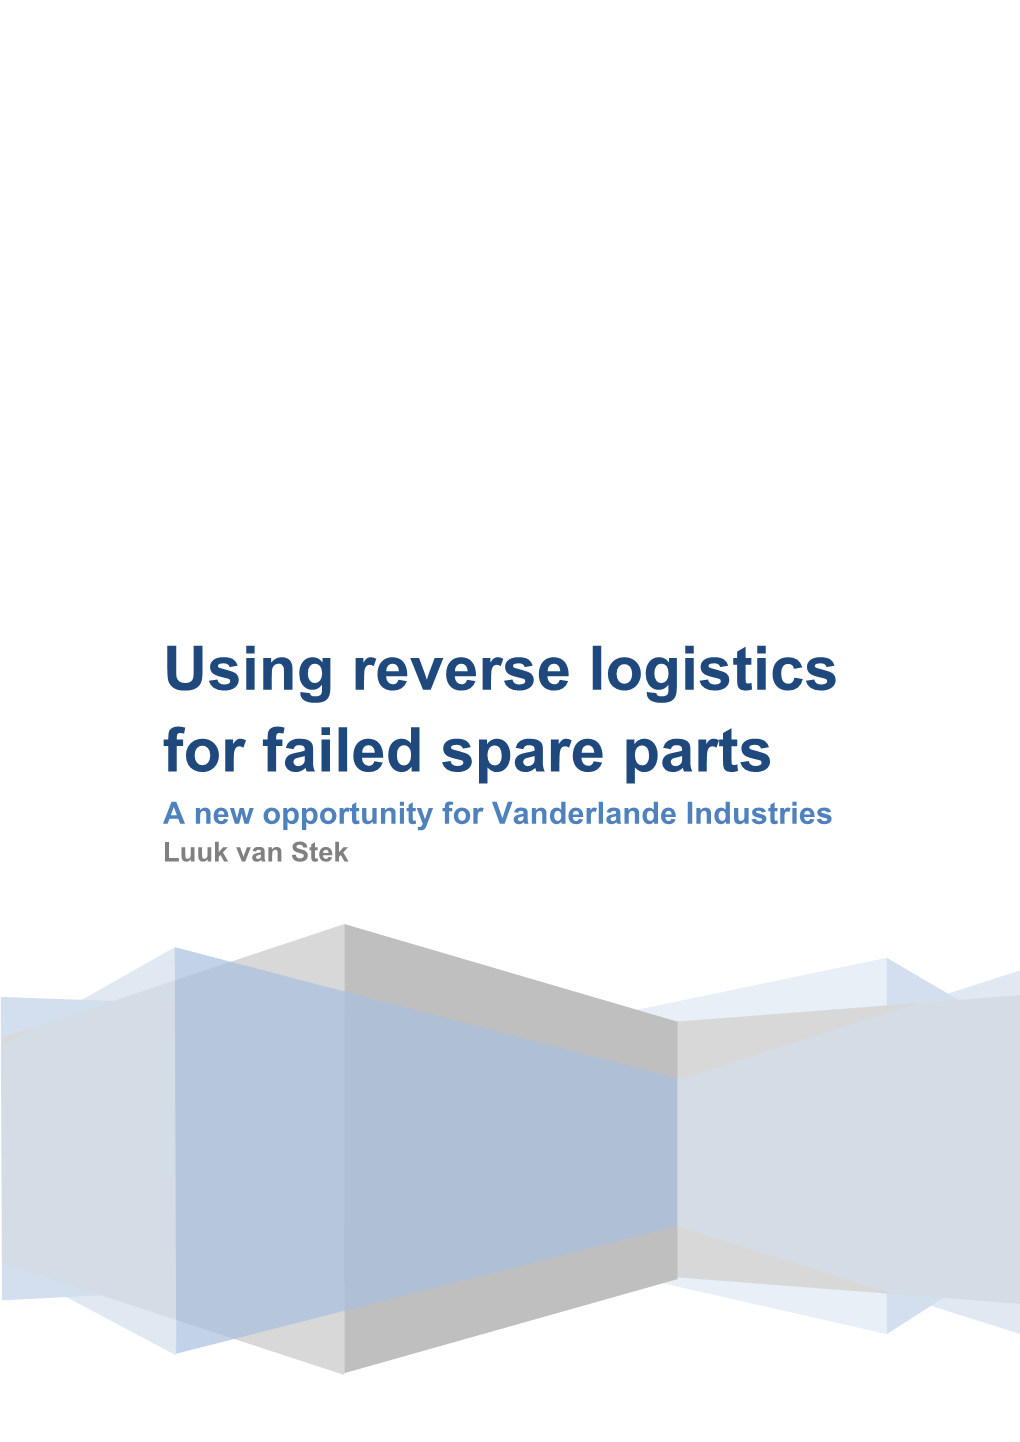 Using Reverse Logistics for Failed Spare Parts a New Opportunity for Vanderlande Industries Luuk Van Stek